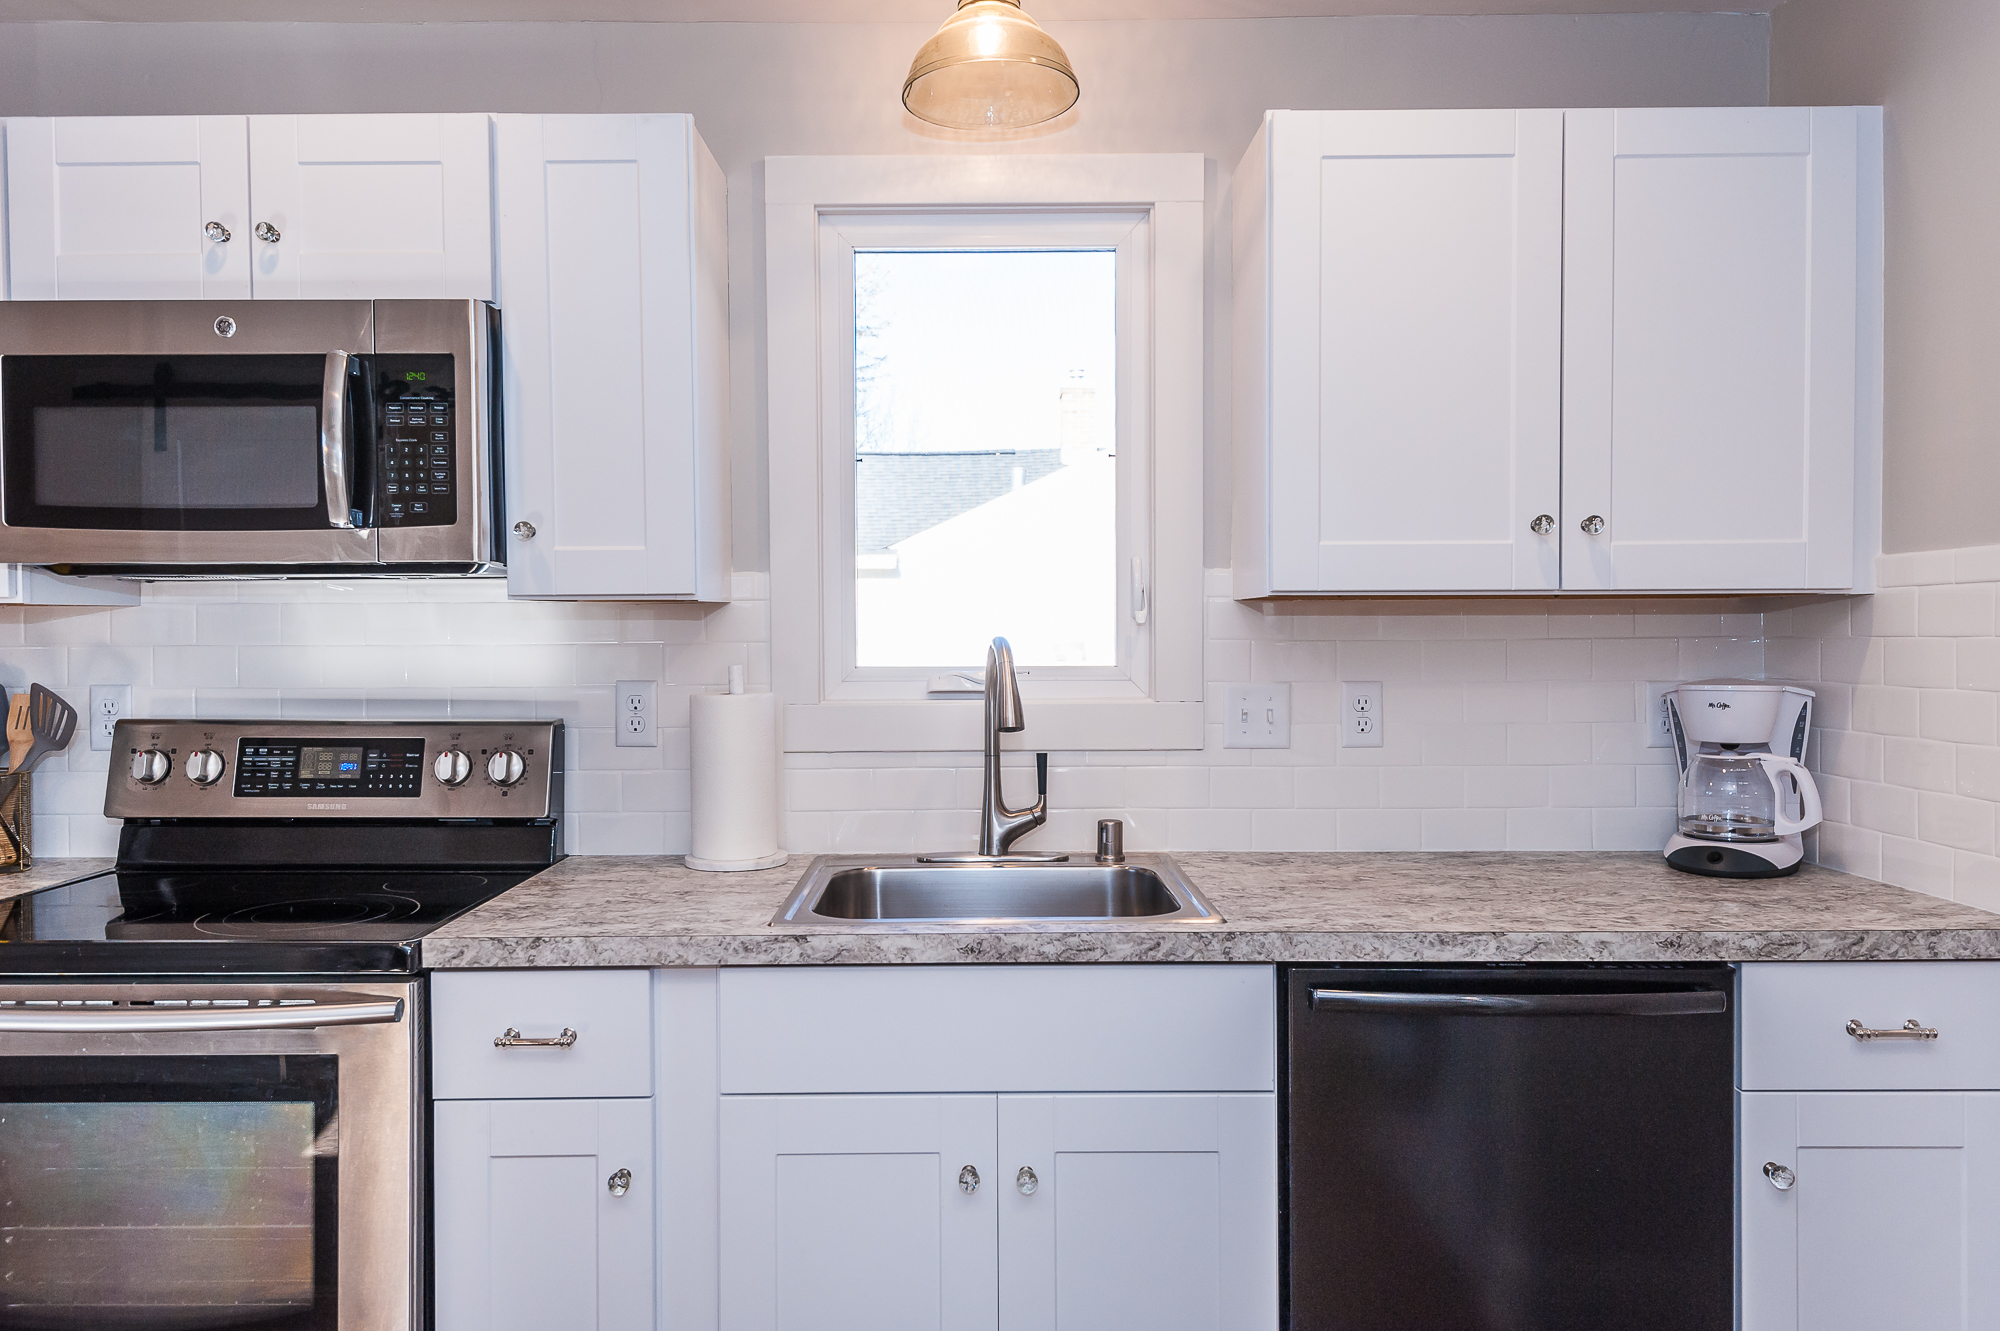 Stainless steal appliances and fully stocked with all you'll need for cooking at home. 